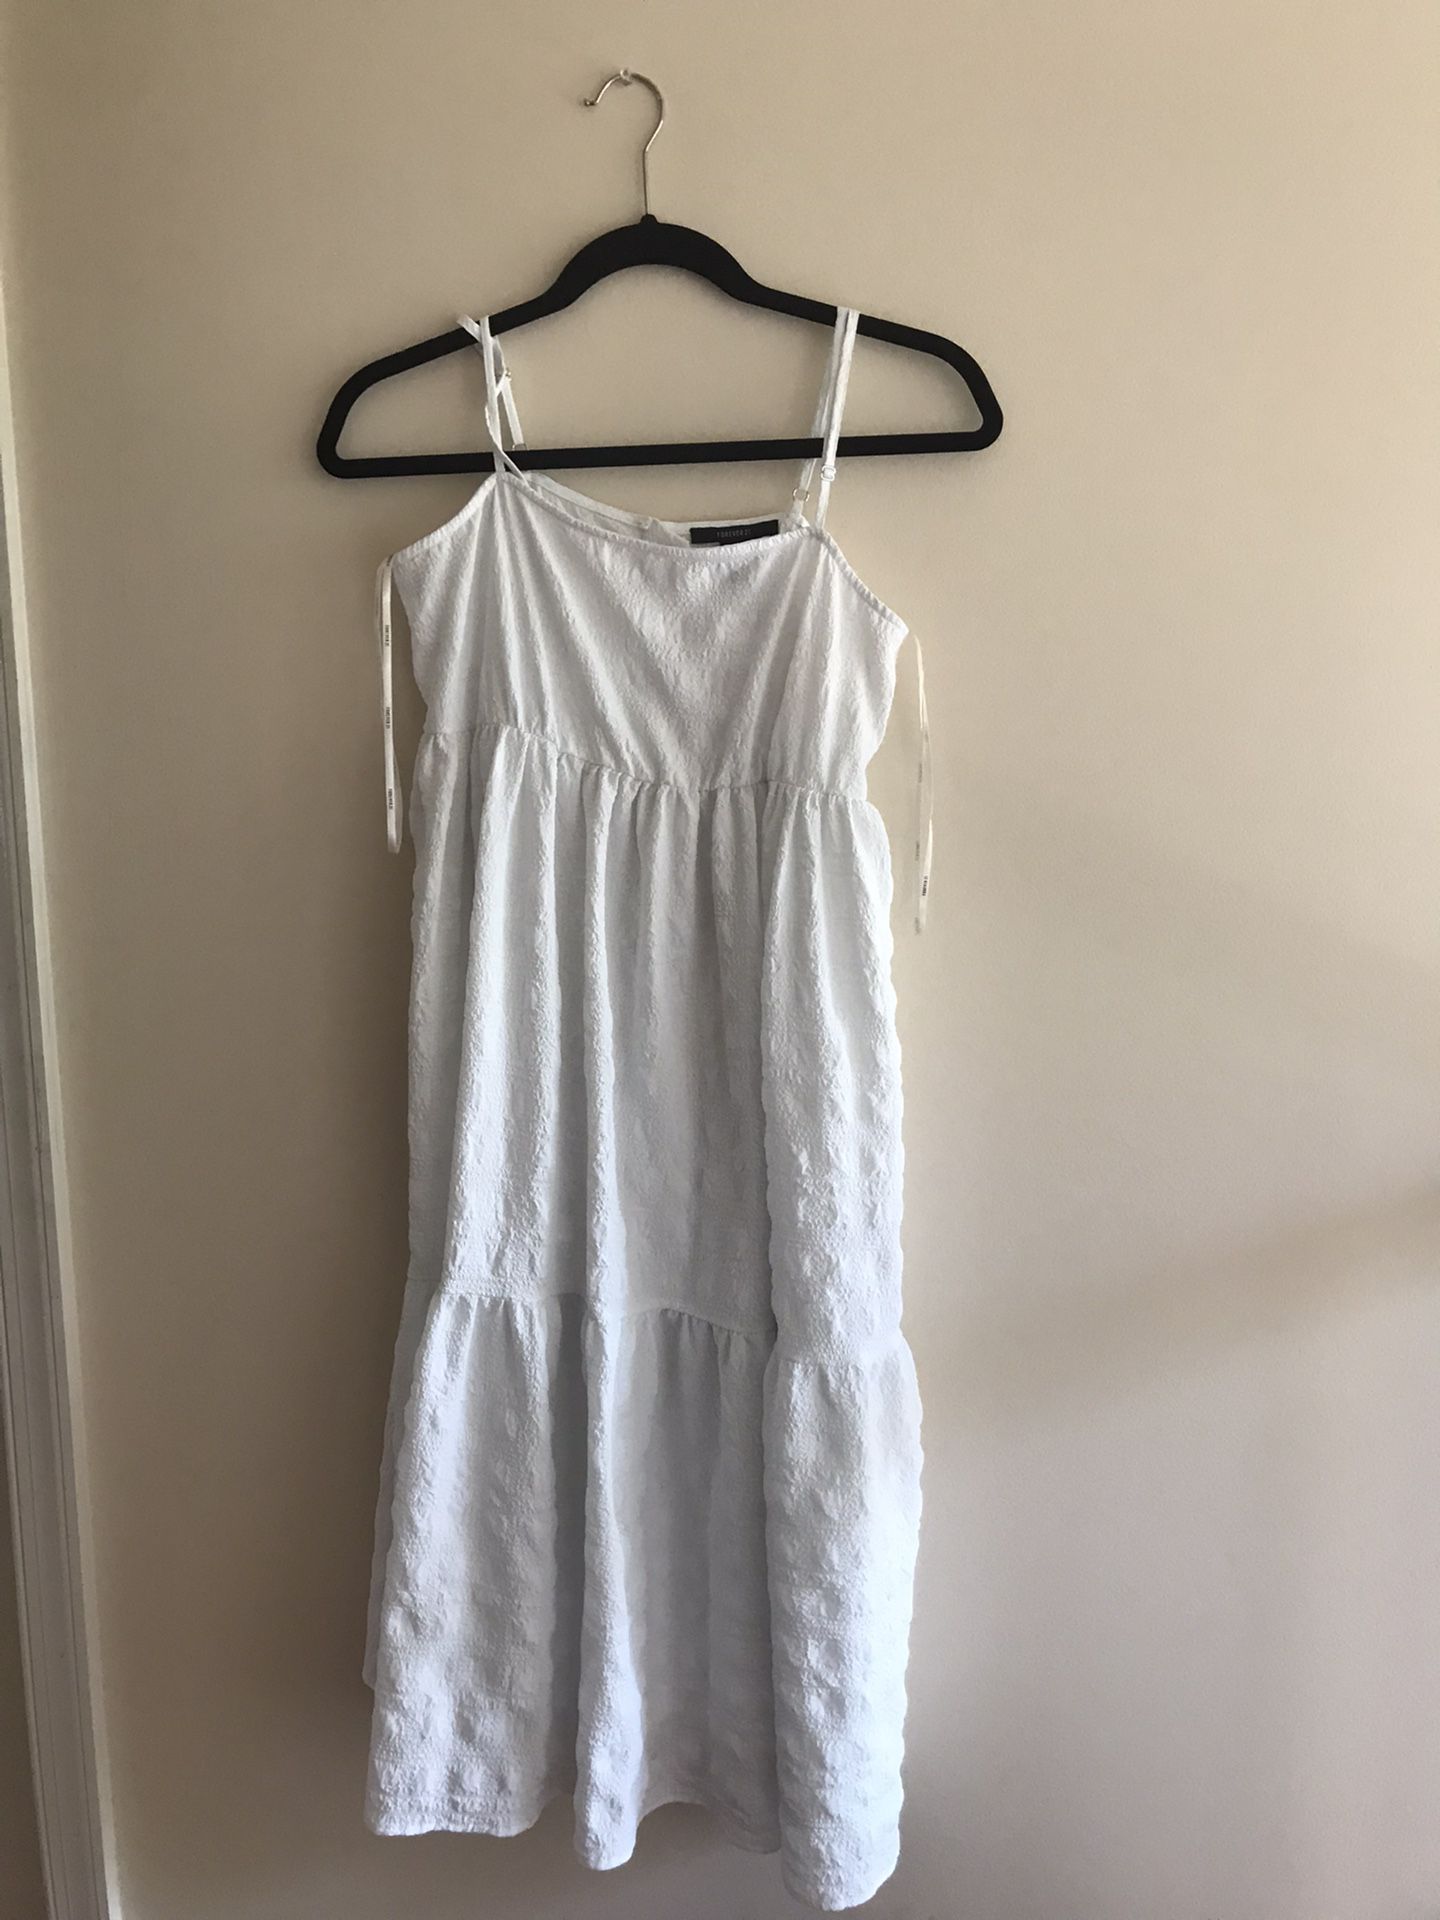 Cute dress for spring